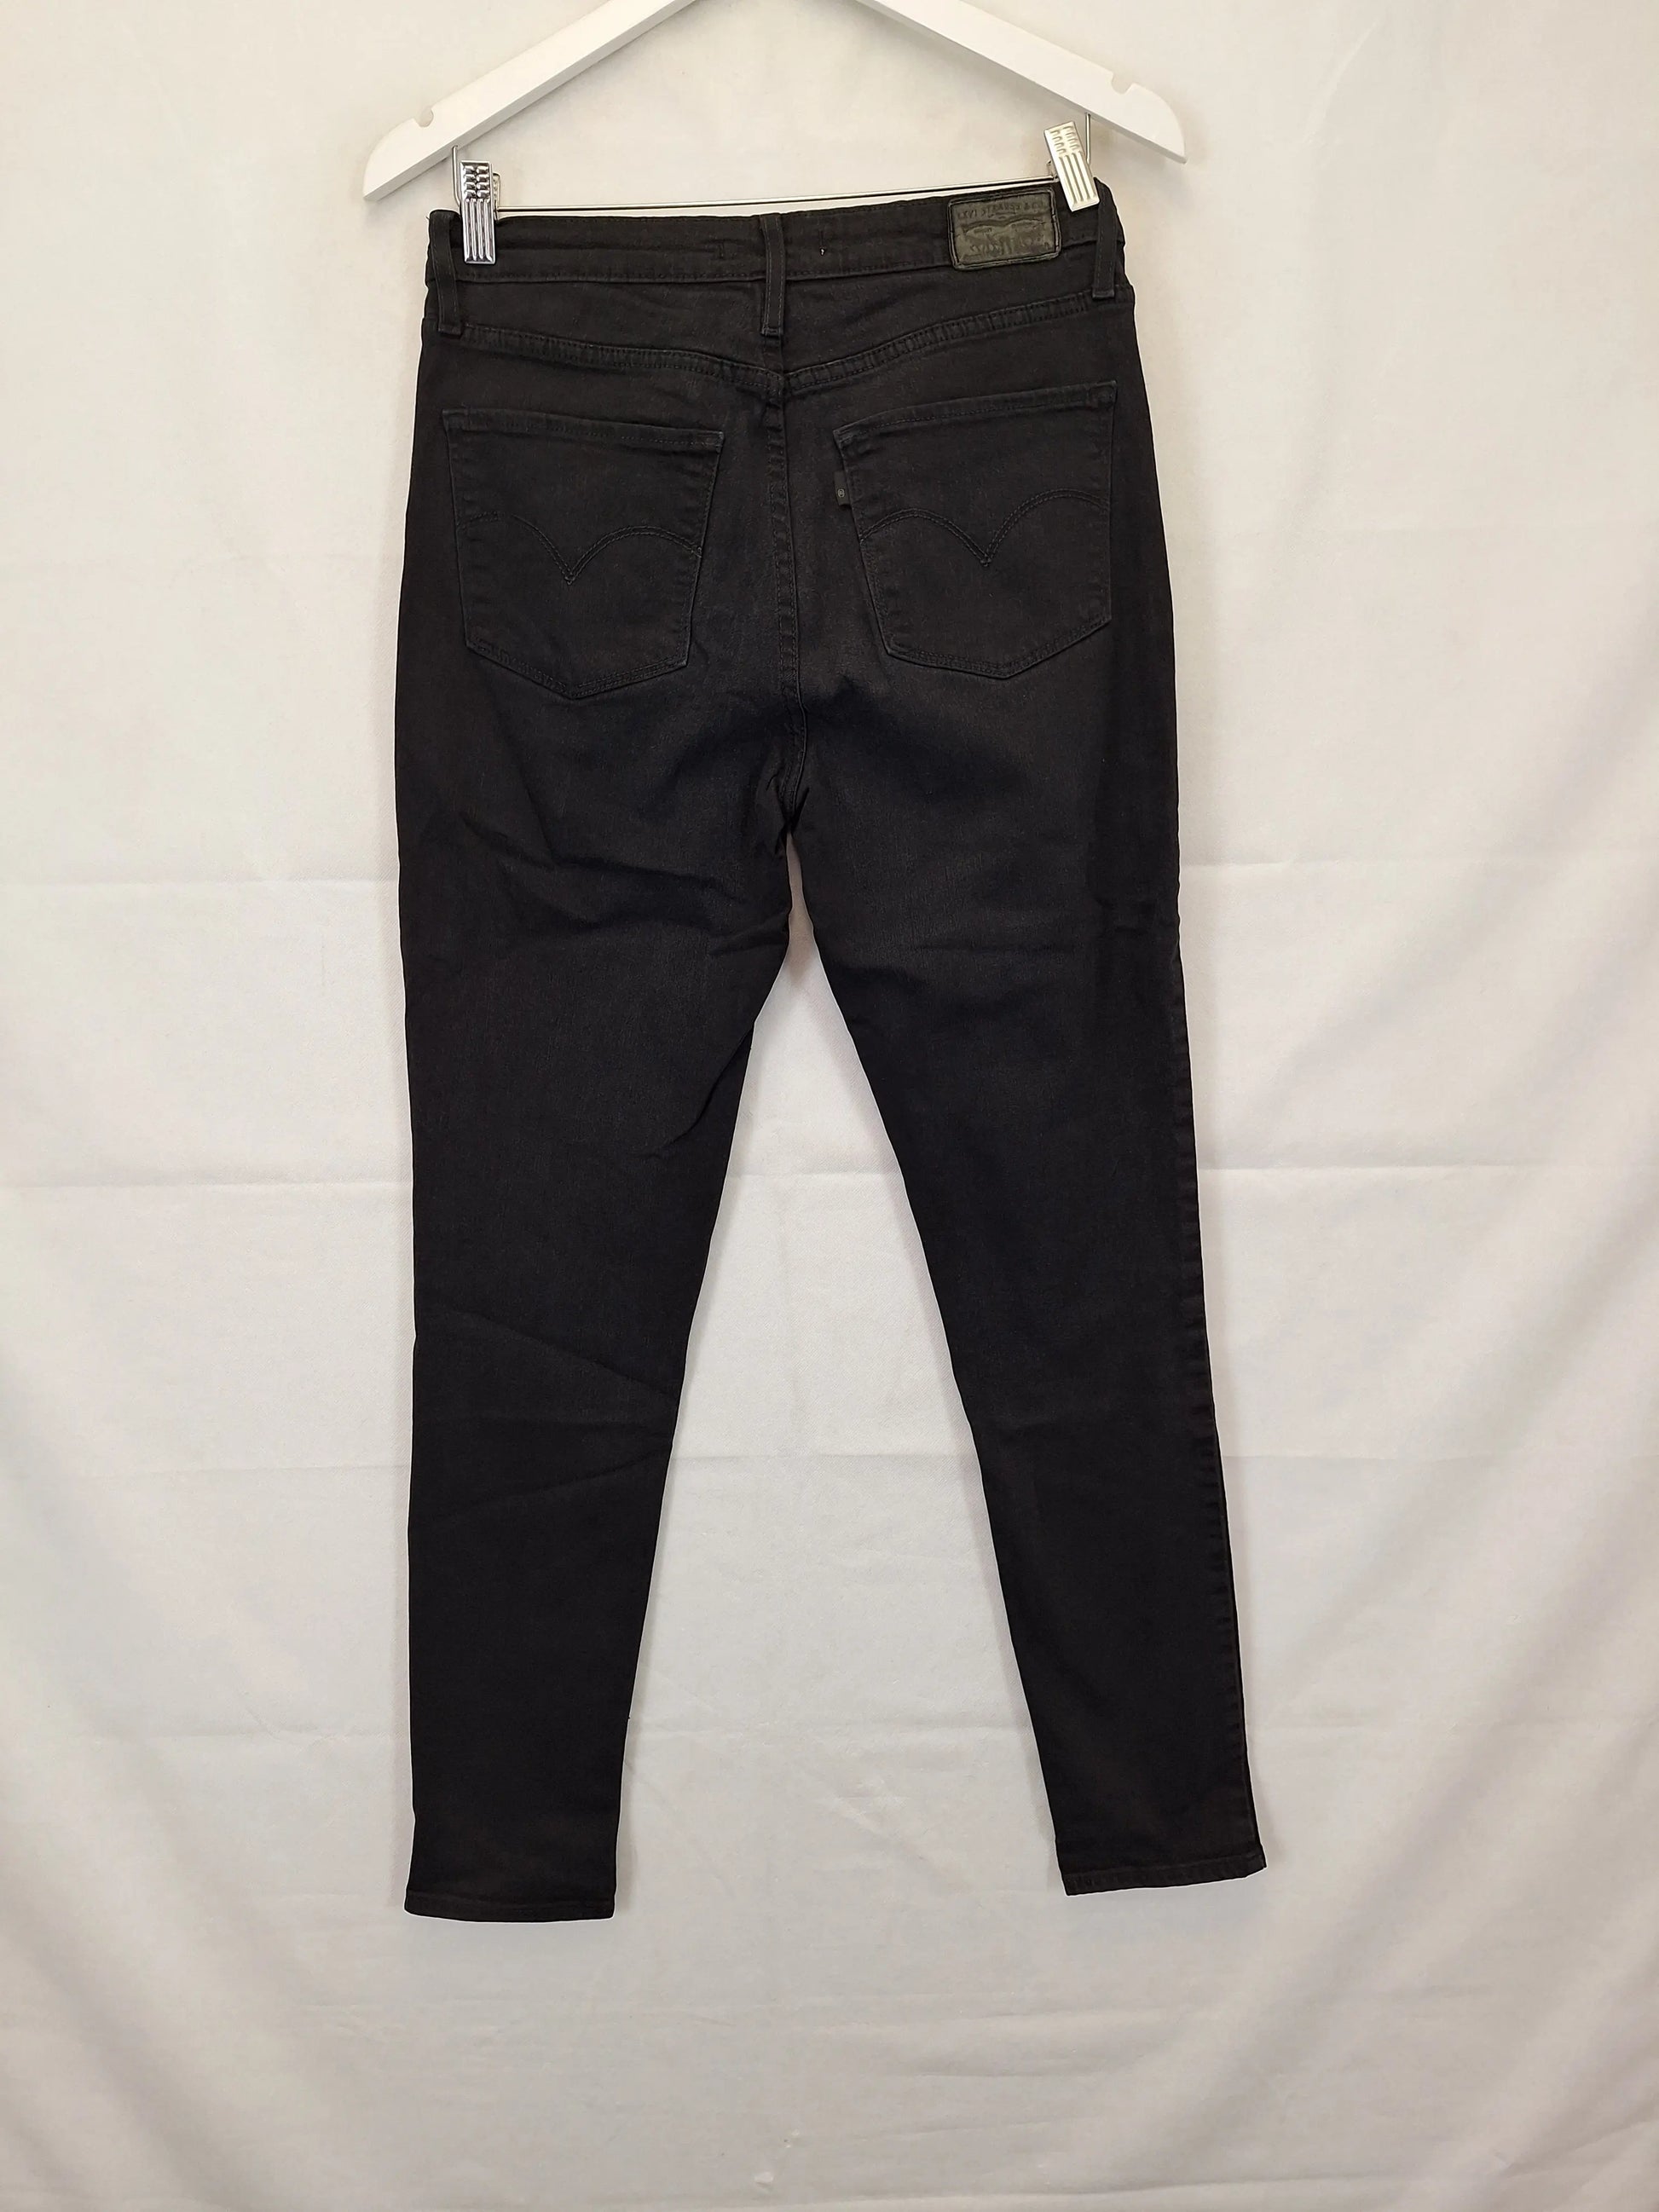 Levi's 721 High Rise Skinny Black Jeans Size M by SwapUp-Online Second Hand Store-Online Thrift Store